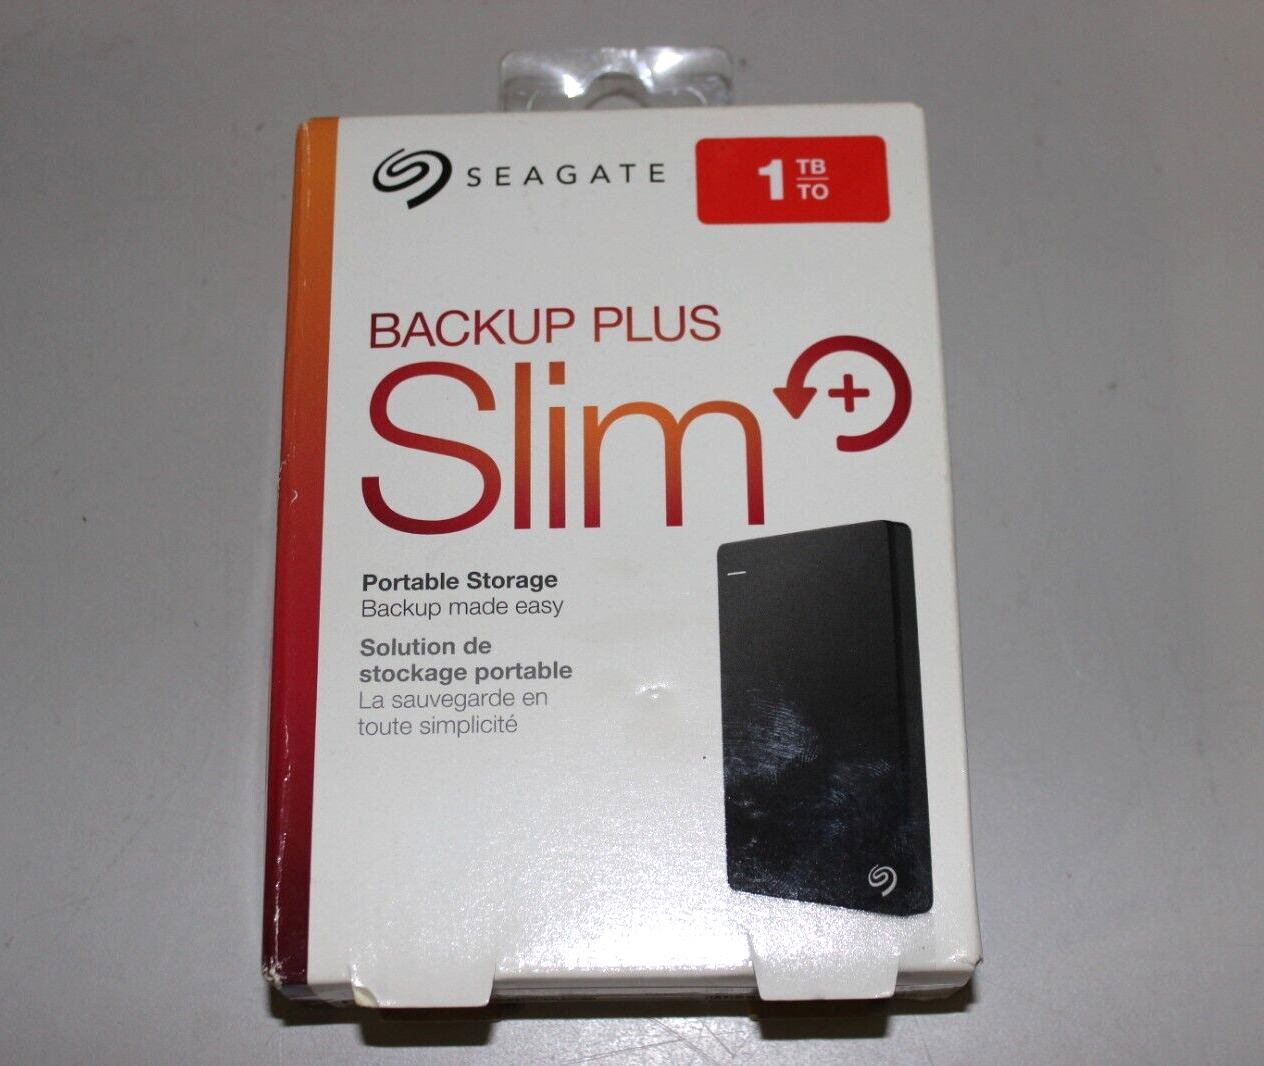 Seagate 1 TB to HDD Backup Plus Slim Portable Storage Windows and MAC NEW IN BOX